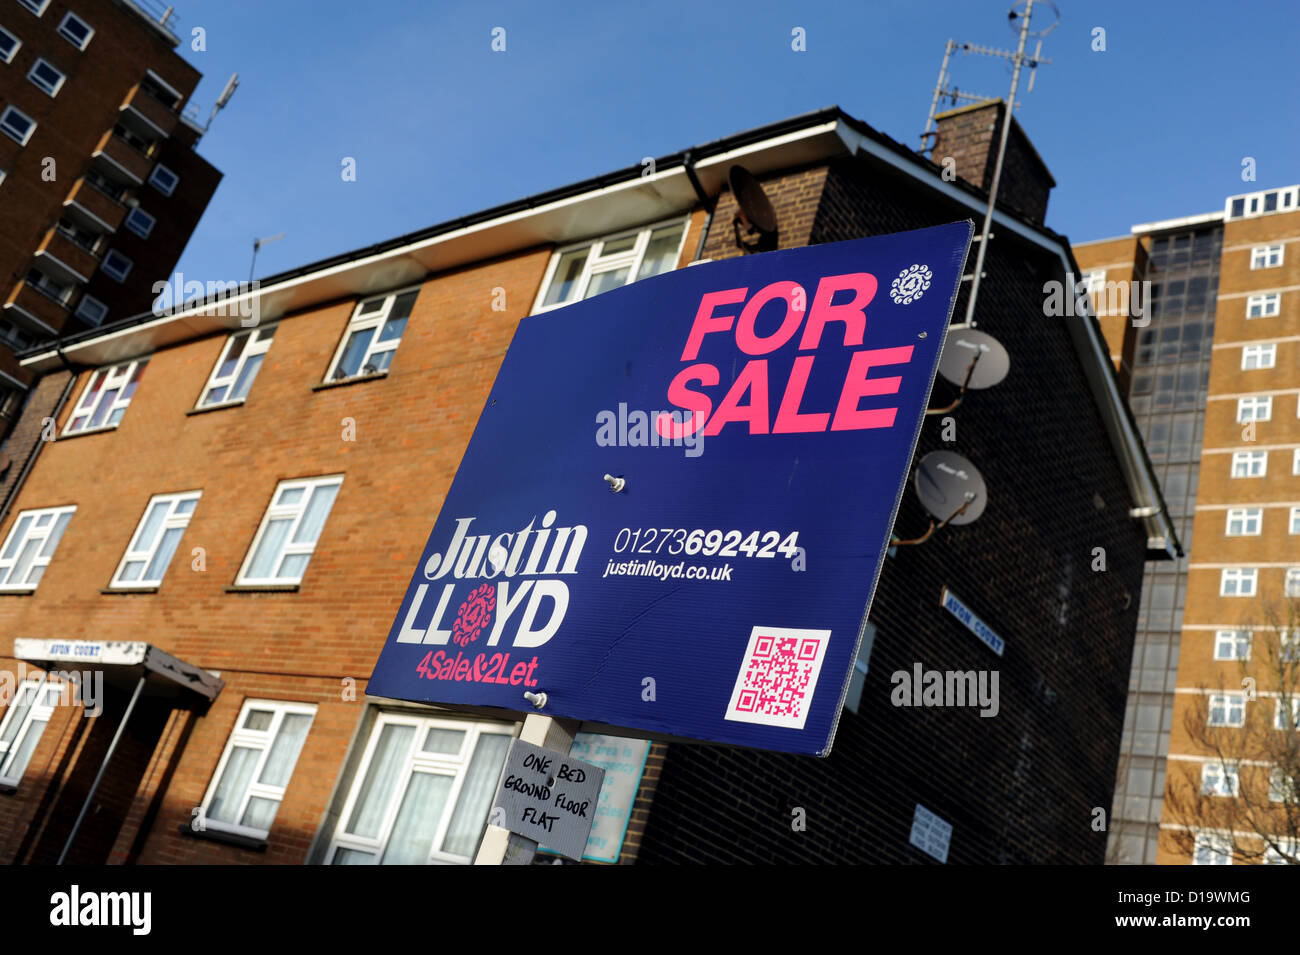 Justin Lloyd For Sale estate agents board outside block of flats in Brighton Stock Photo